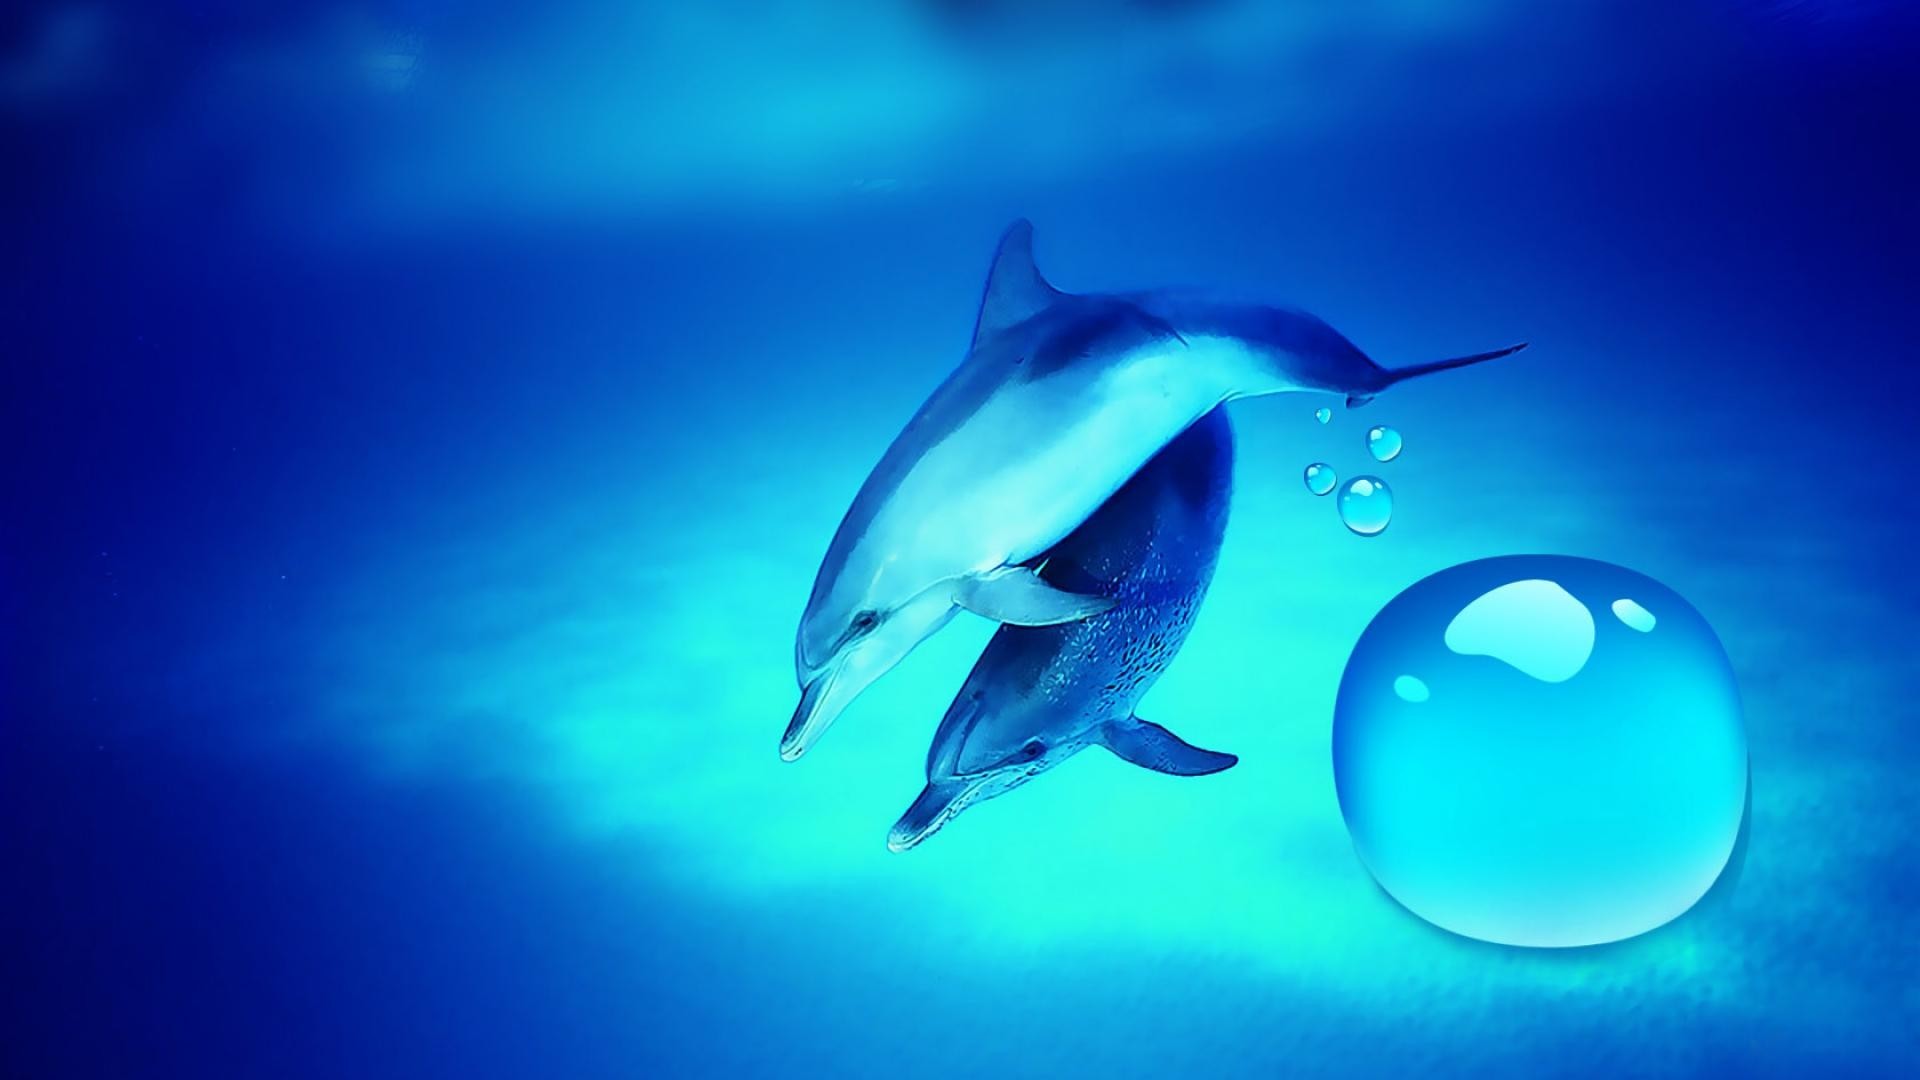 1920x1080  Free Dolphin Wallpapers For Desktop Wallpaper Dolphin Pictures Wallpapers  Wallpapers)